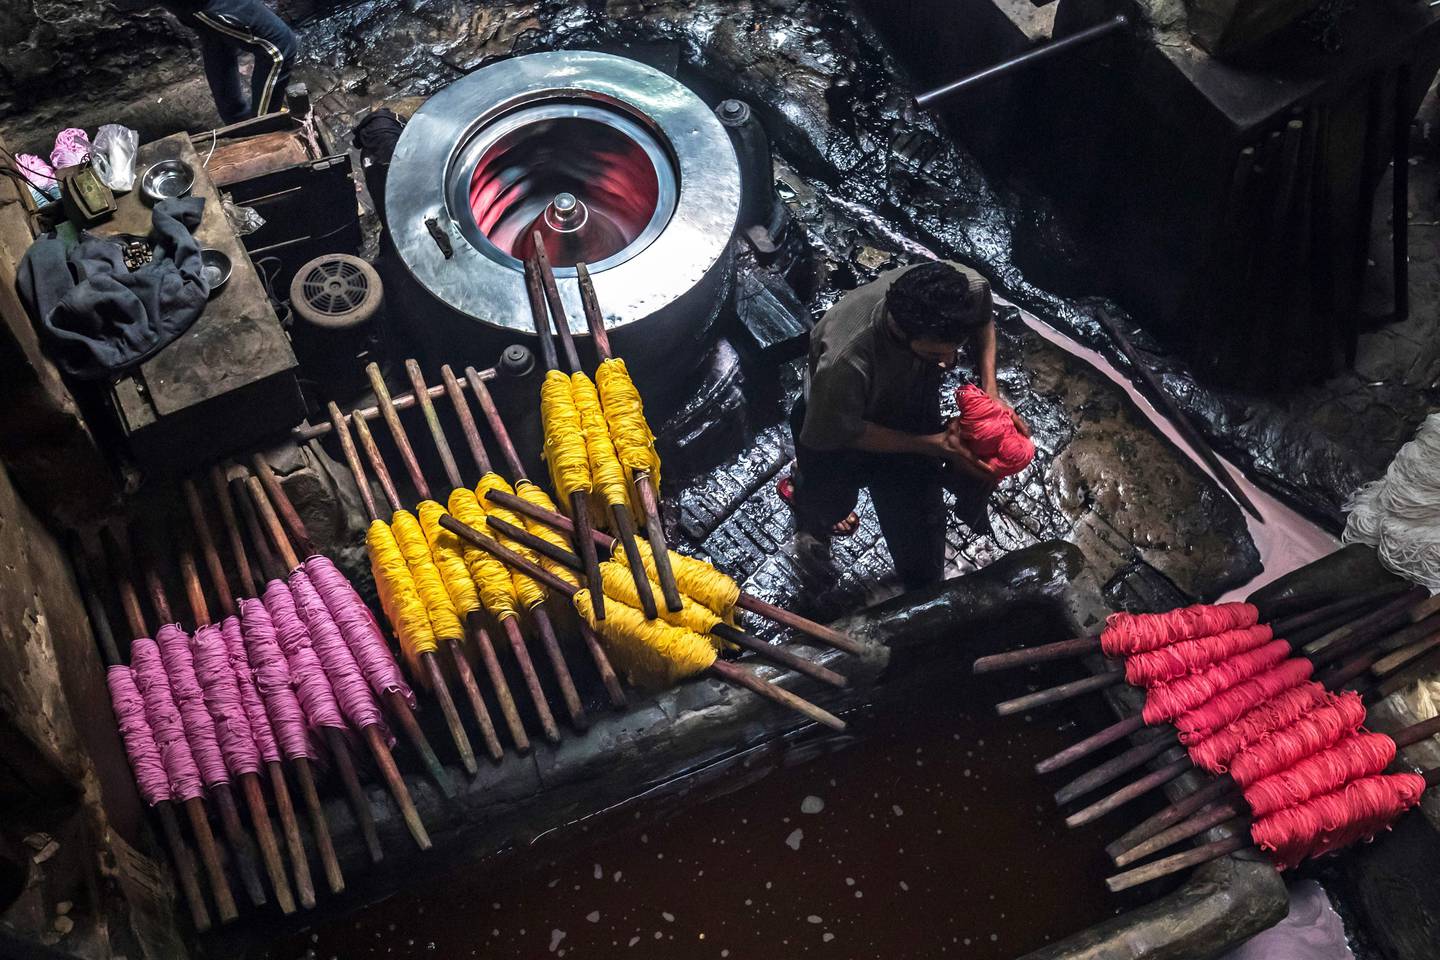 Workers dye yarns at a traditional hand-dying workshop in Cairo, Egypt.